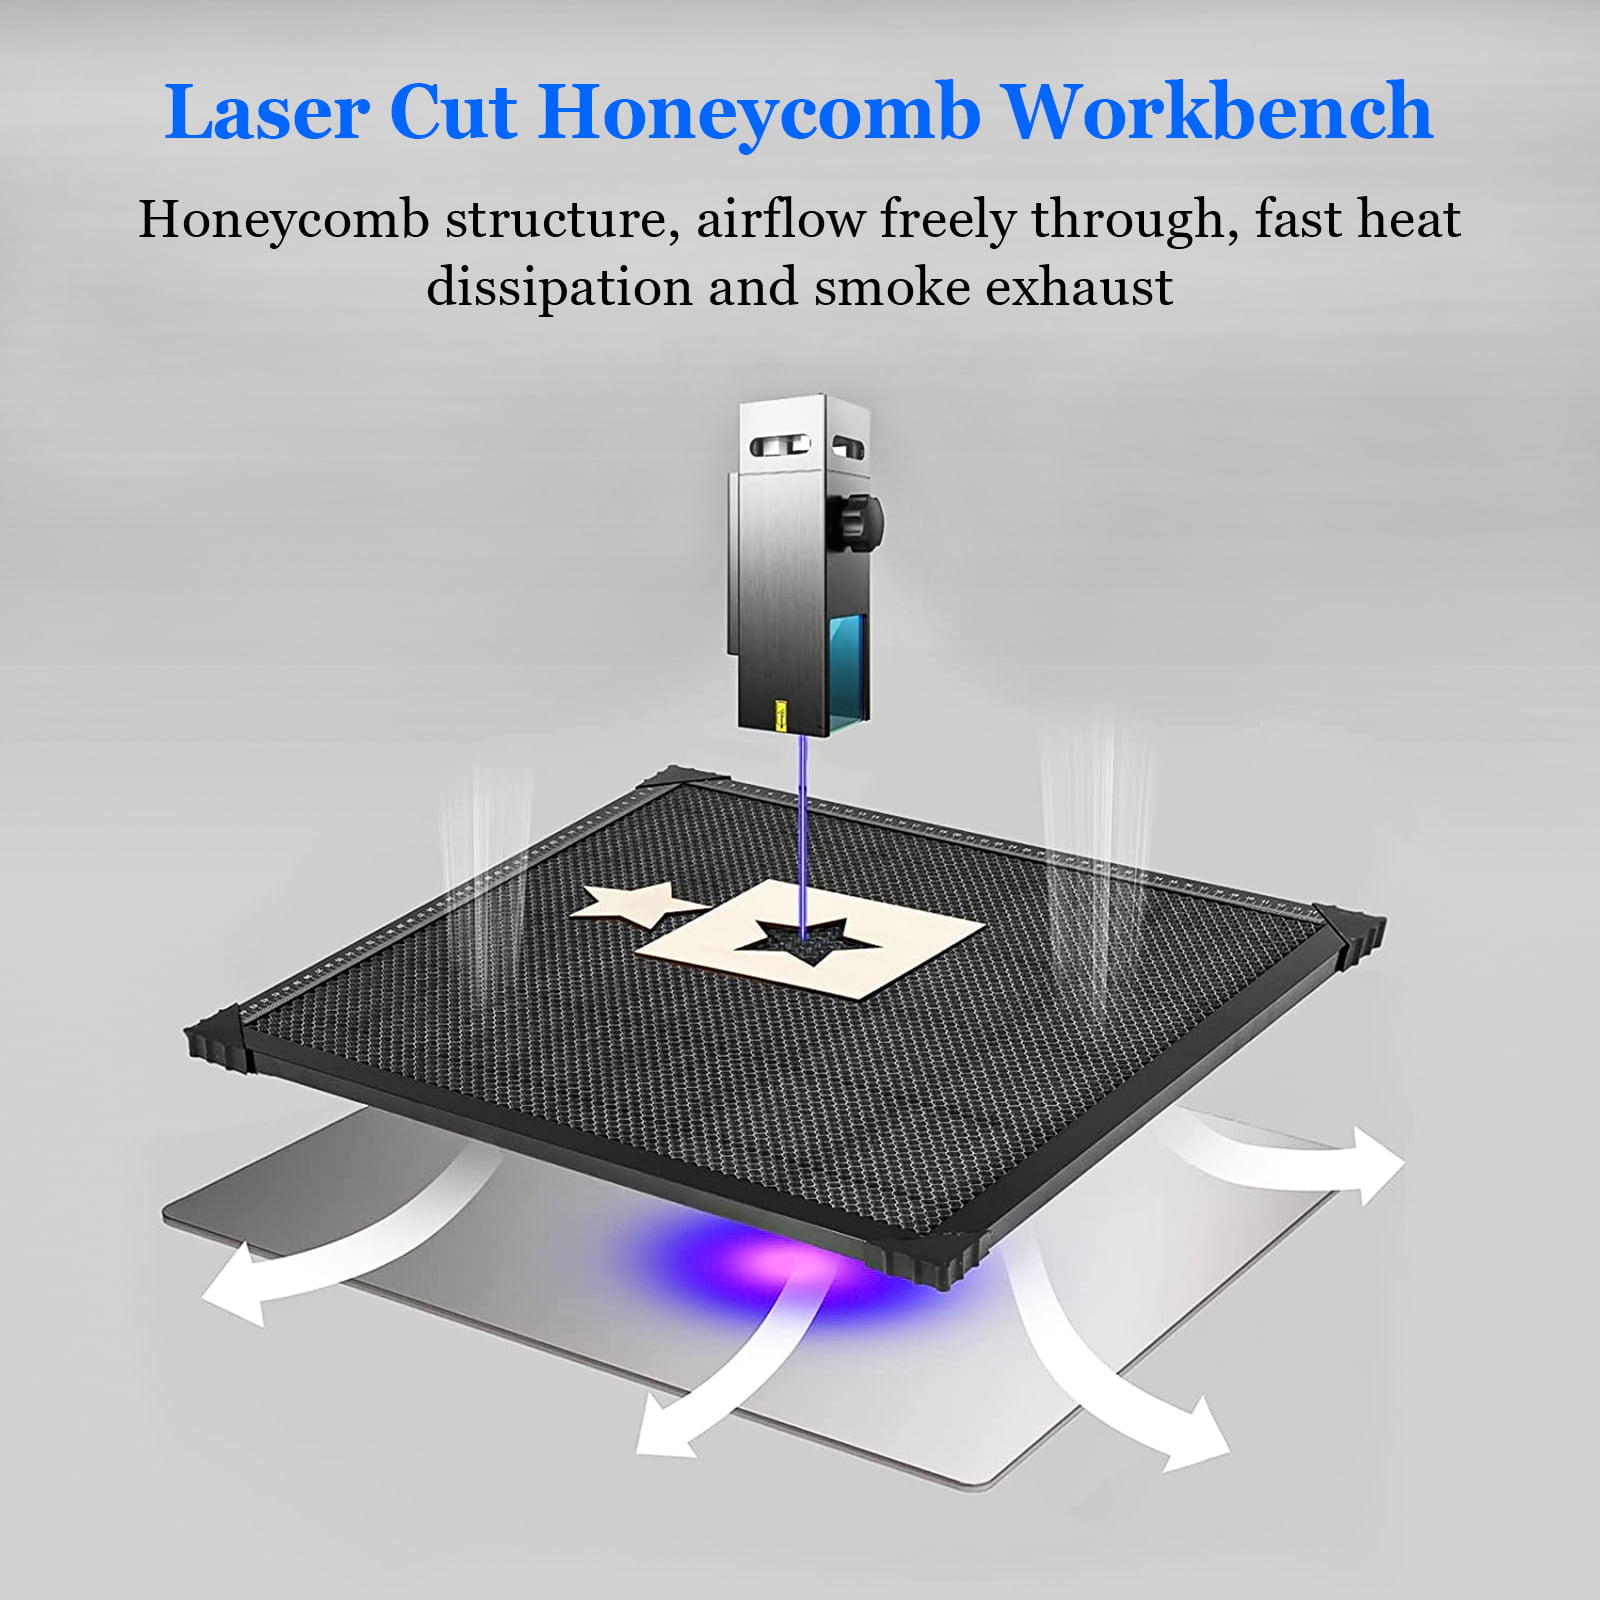 Dropship Laser Honeycomb Working Table, Honeycomb Laser Bed For Smooth Edge  Cutting, Fast Heat Dissipation And Desktop-Protecting to Sell Online at a  Lower Price